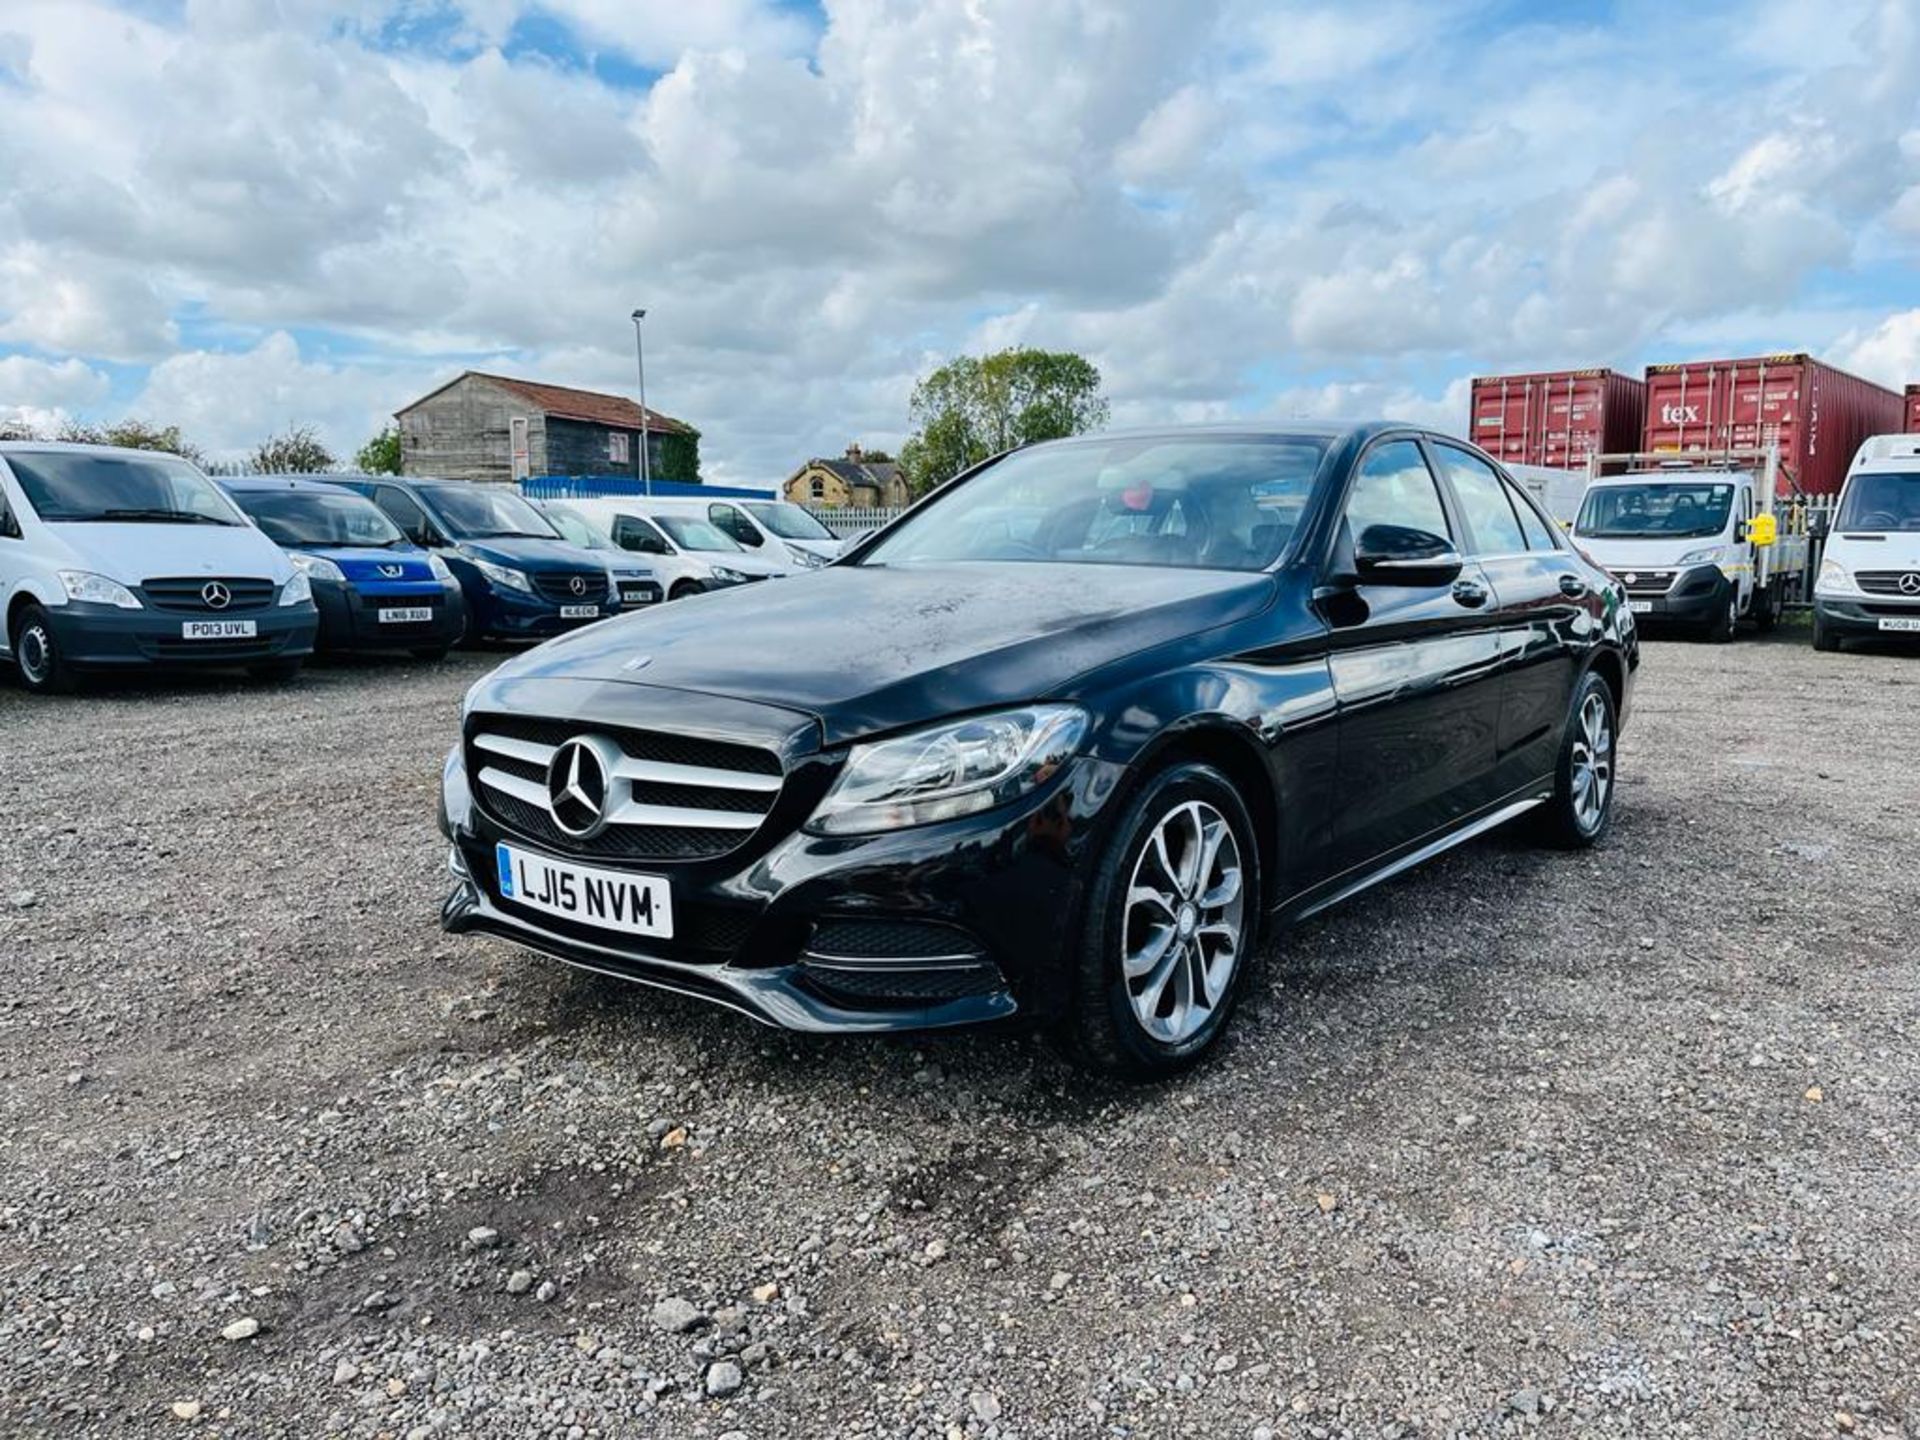 ** ON SALE ** Mercedes - Benz C220 SE Saloon 2.1 2015 "15 Reg" - Automatic - A/C - Only 72548 Miles - Image 3 of 29